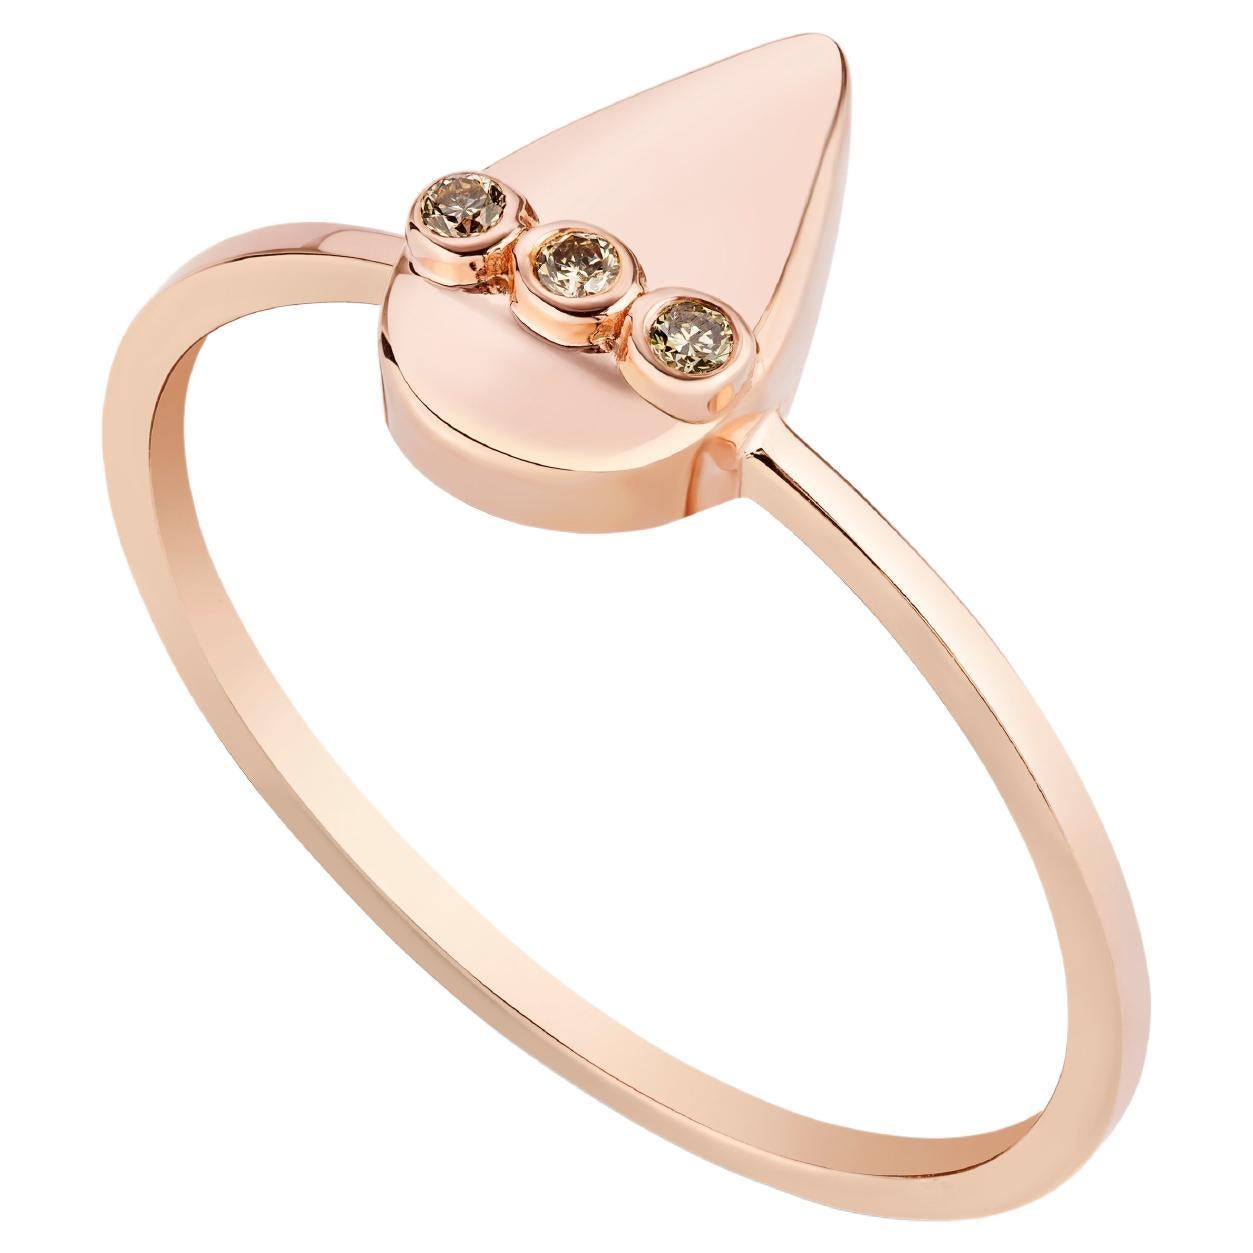 18k rose gold ring with champagne hued diamond drop US size 7